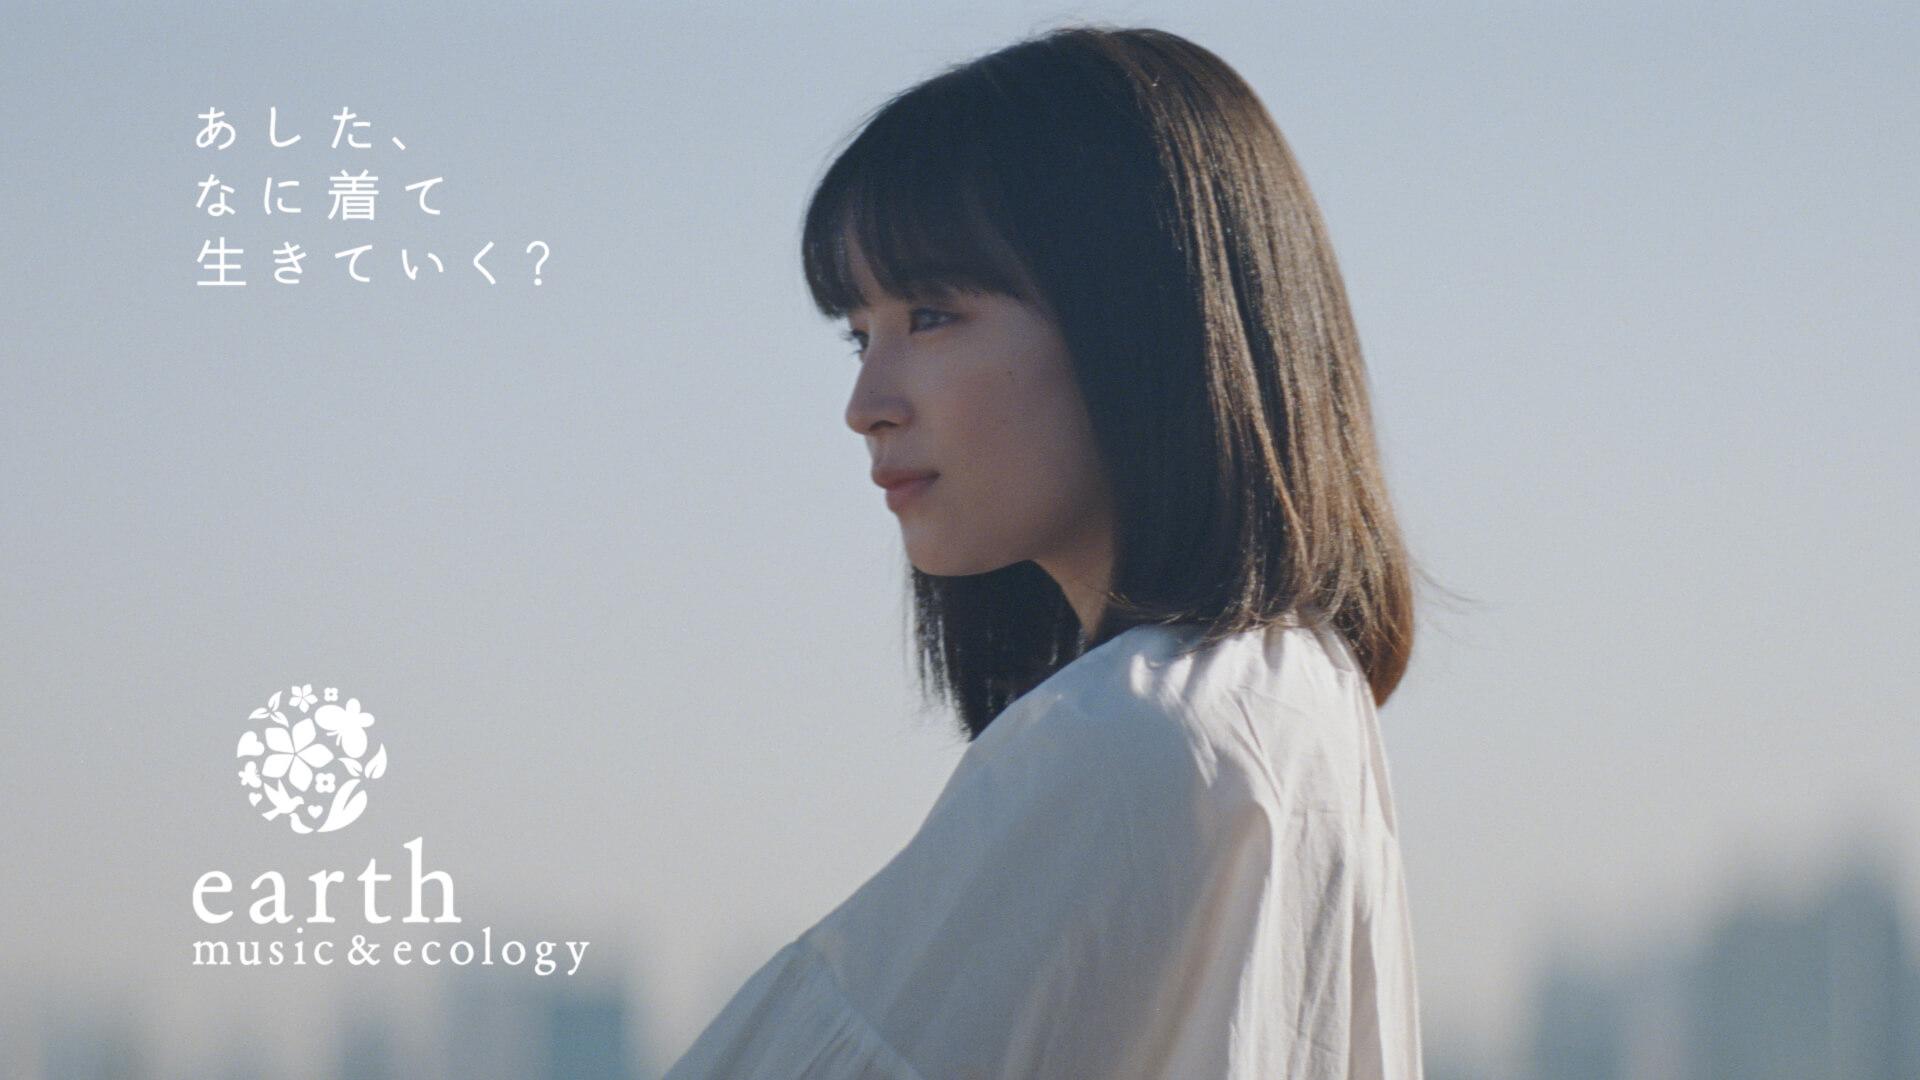 Song From Aimer's New Album to Feature in 'earth music&ecology